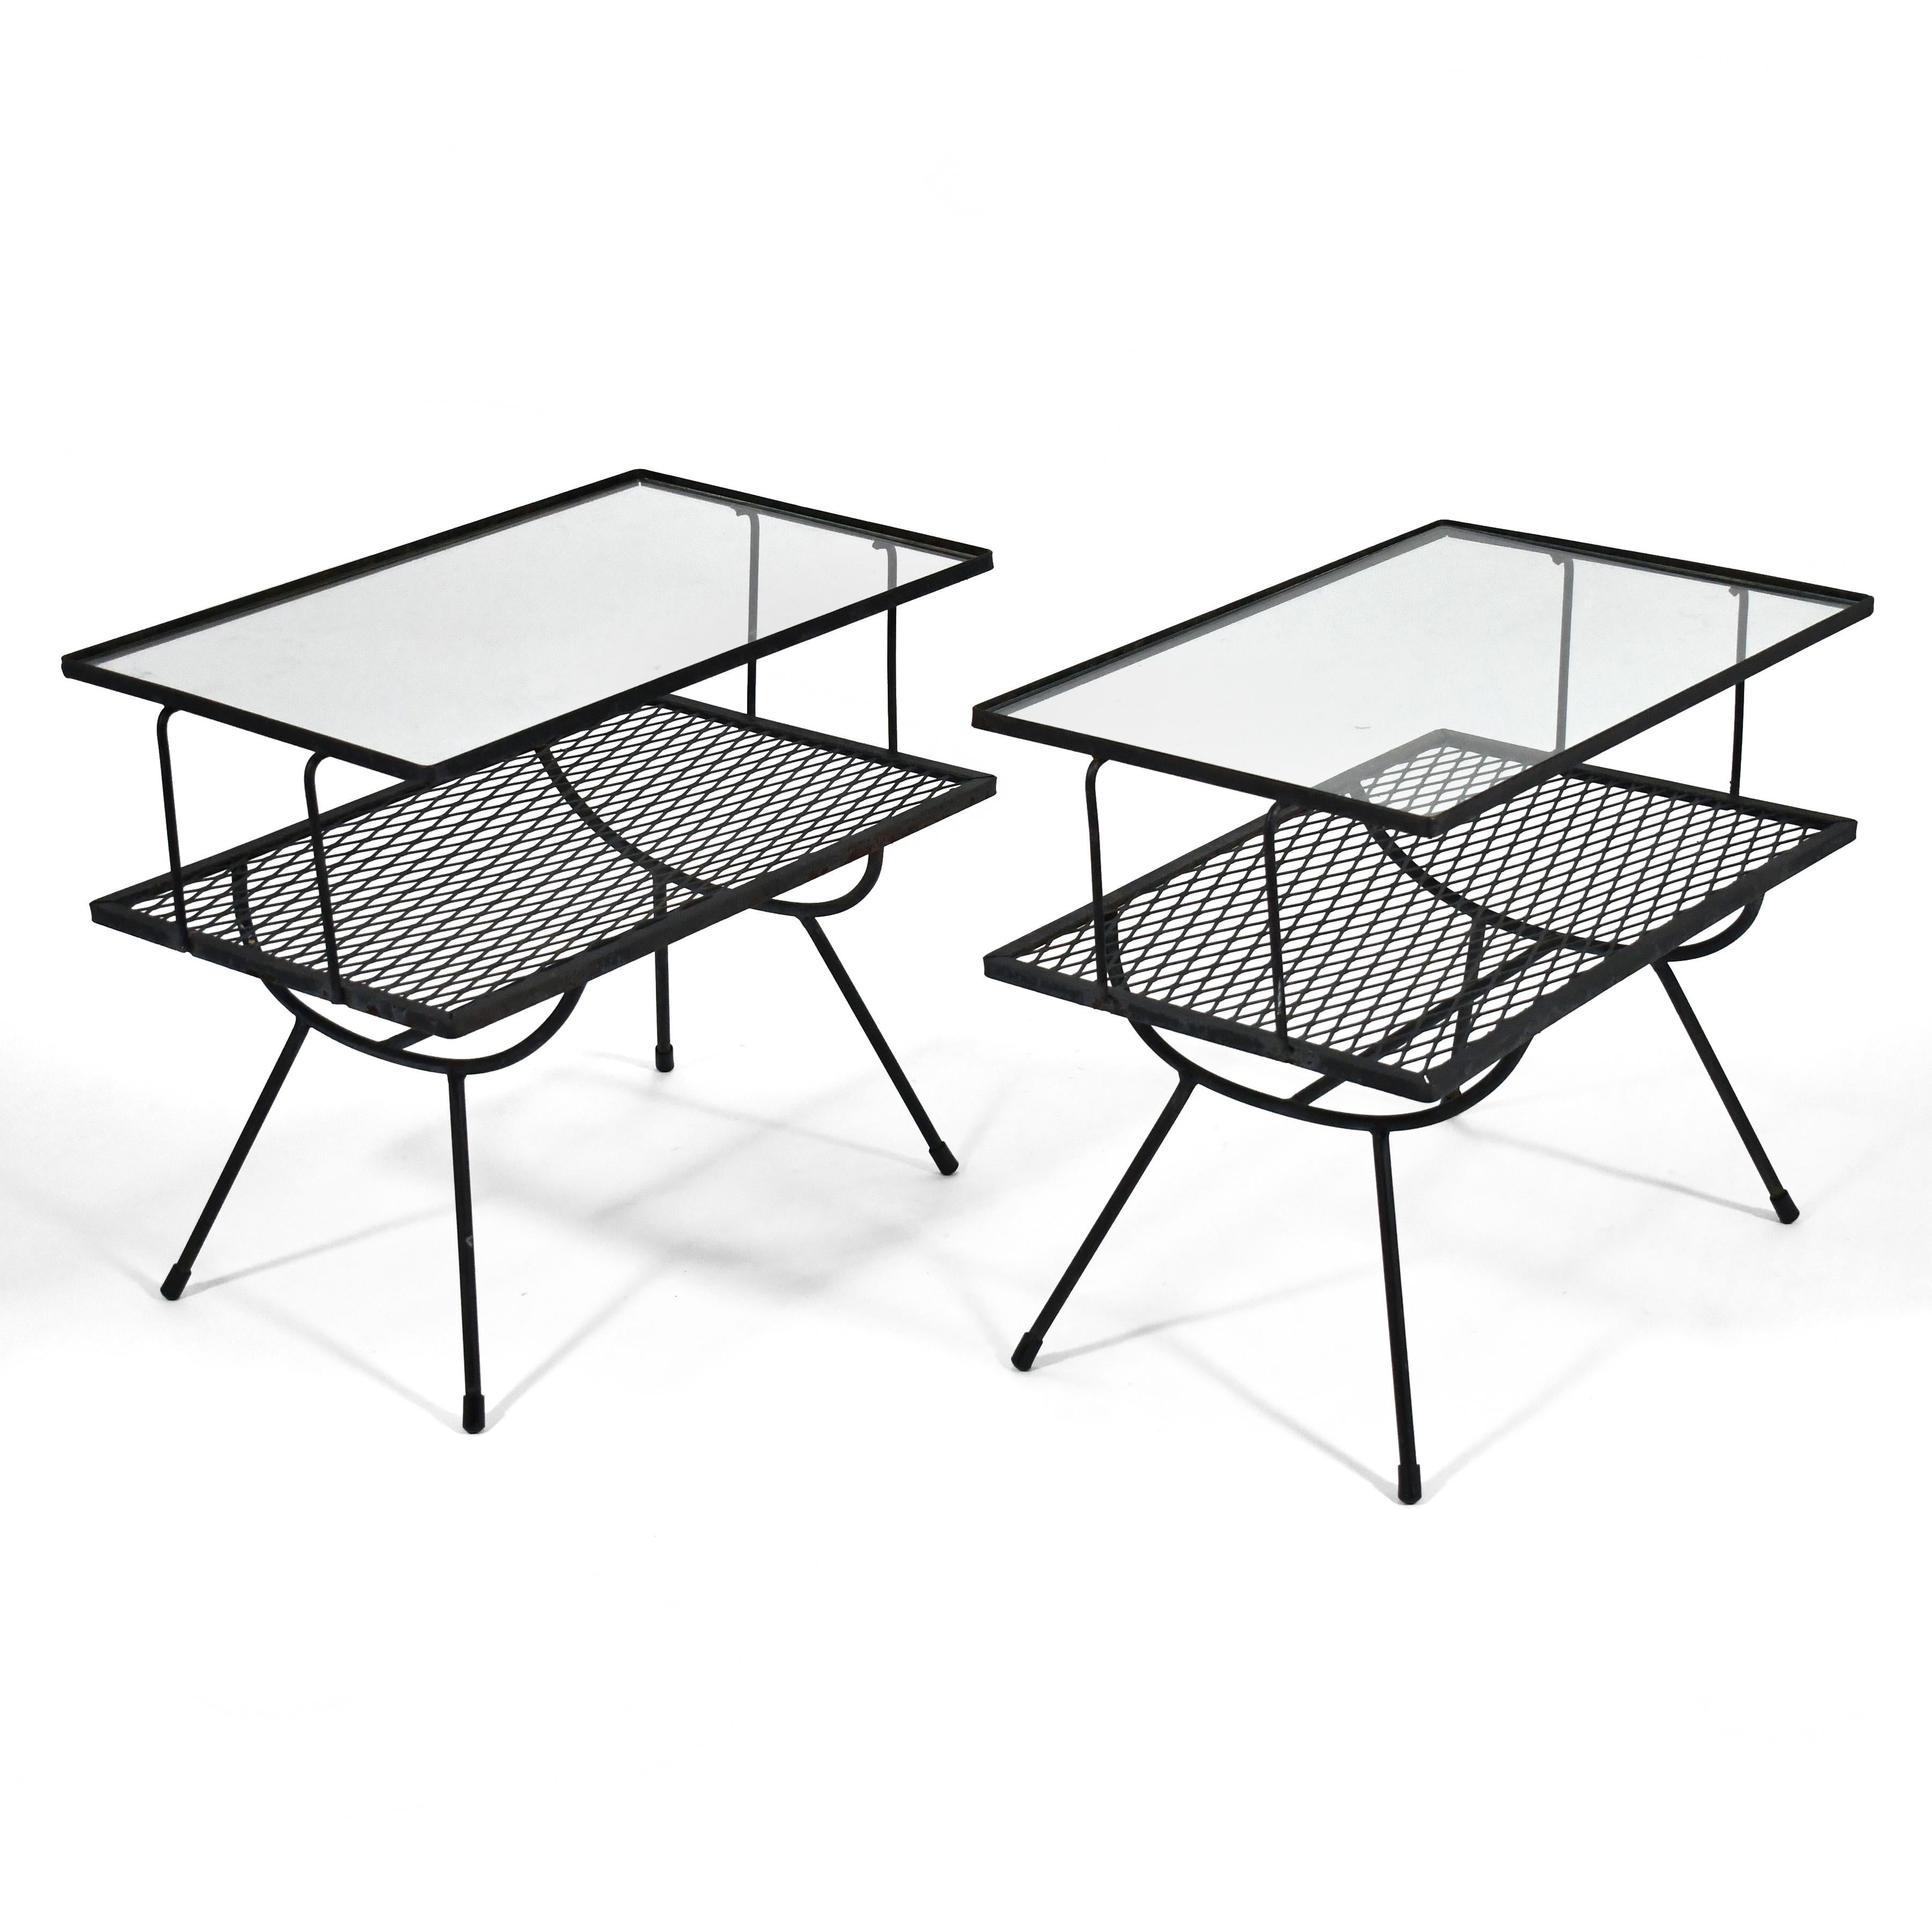 Classic California post-war design, these end tables with surfaces of glass and expanded mesh, are a visually light, airy design. Often mistaken for a George Nelson design by Arbuk, they were actually made and retailed by Frank & Sons.

22.5